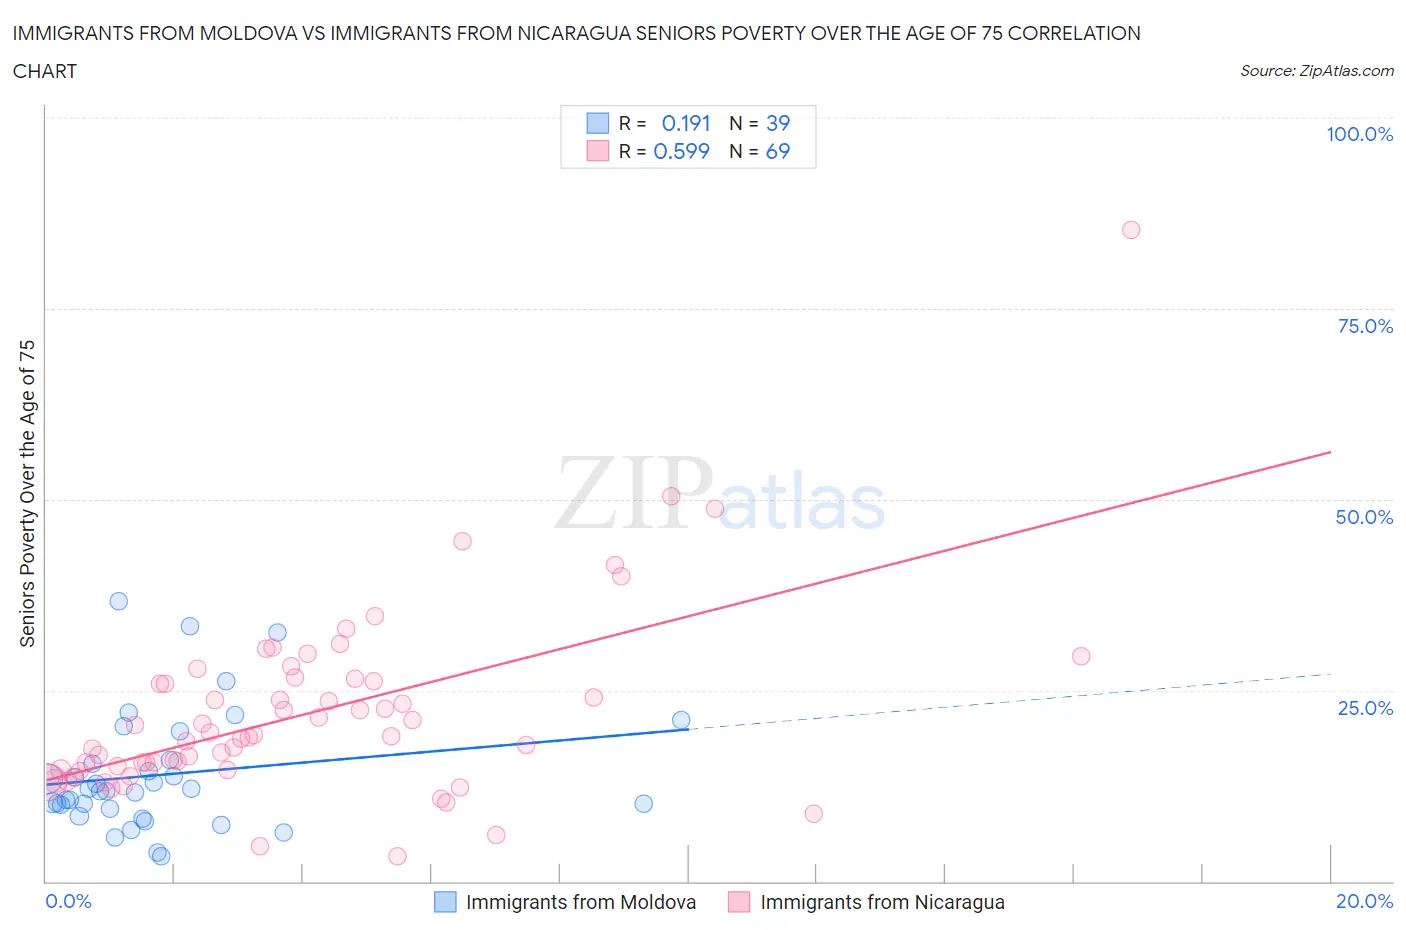 Immigrants from Moldova vs Immigrants from Nicaragua Seniors Poverty Over the Age of 75